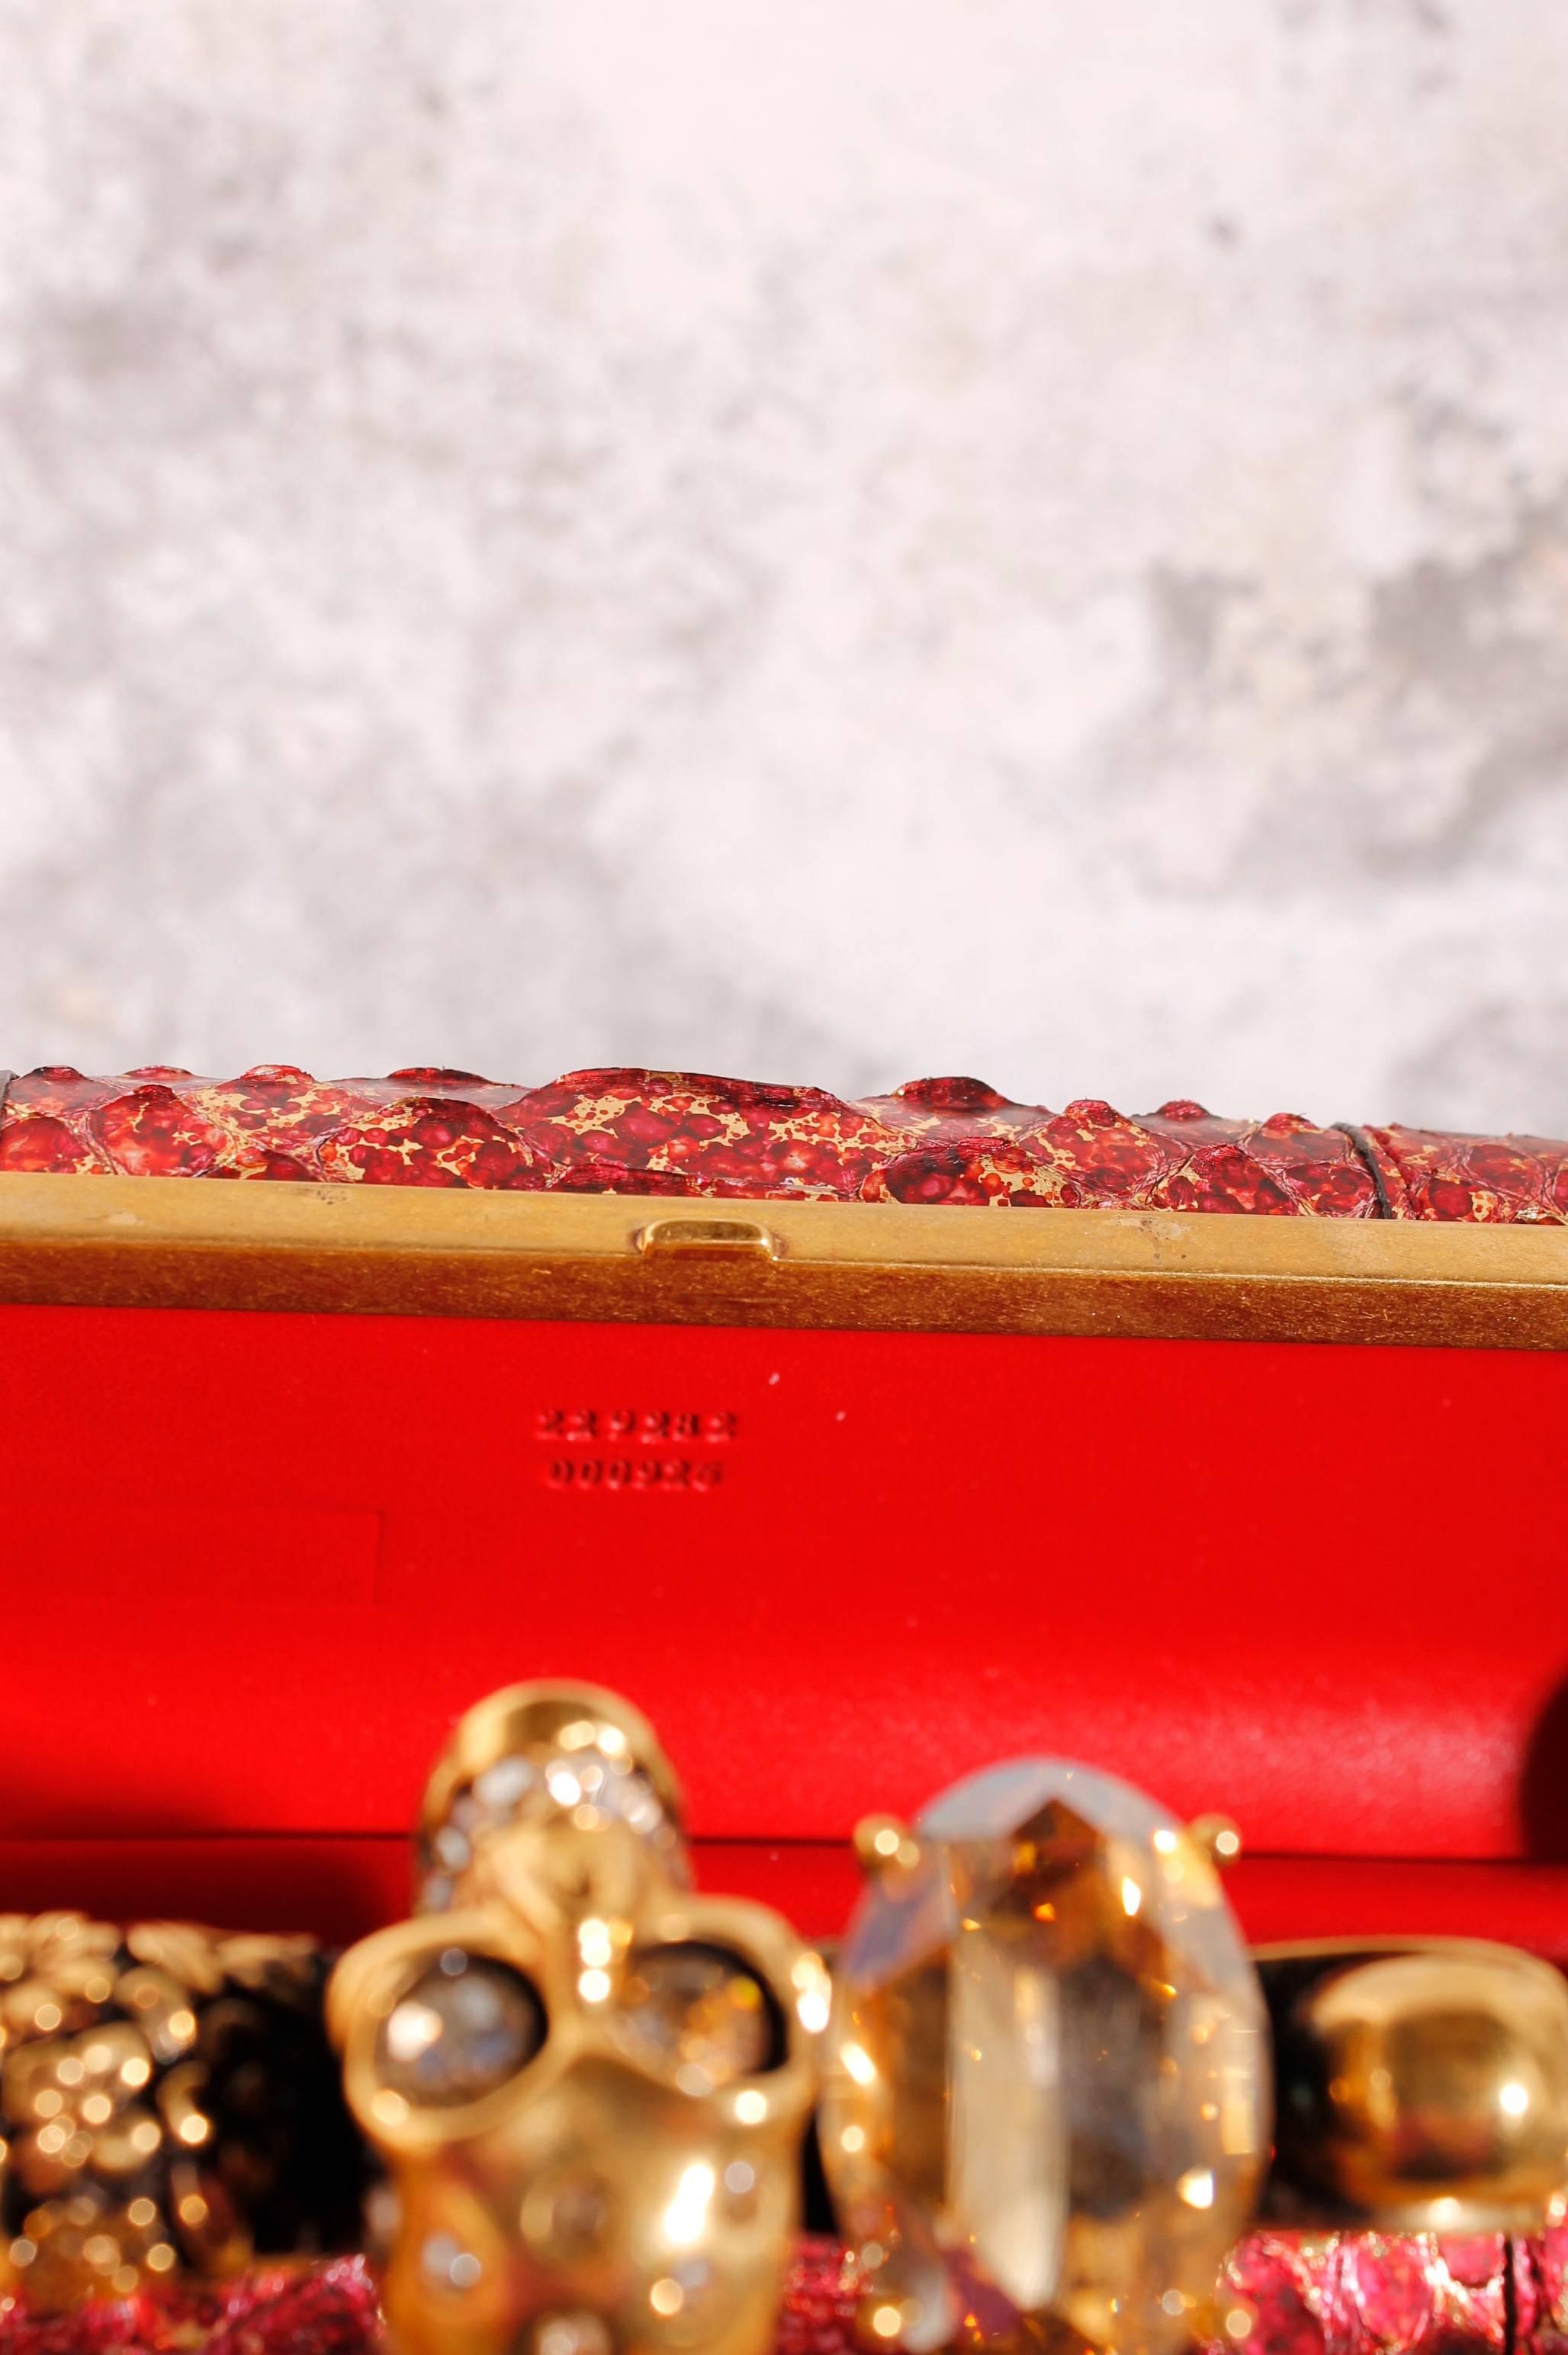 The famous clutch of Alexander McQueen! This one is made of python leather in red golden metallic. 

The hardware is in gold with an 'antique finish' which gives a nice contrast. The four rings on top are used as closure and are all different. One